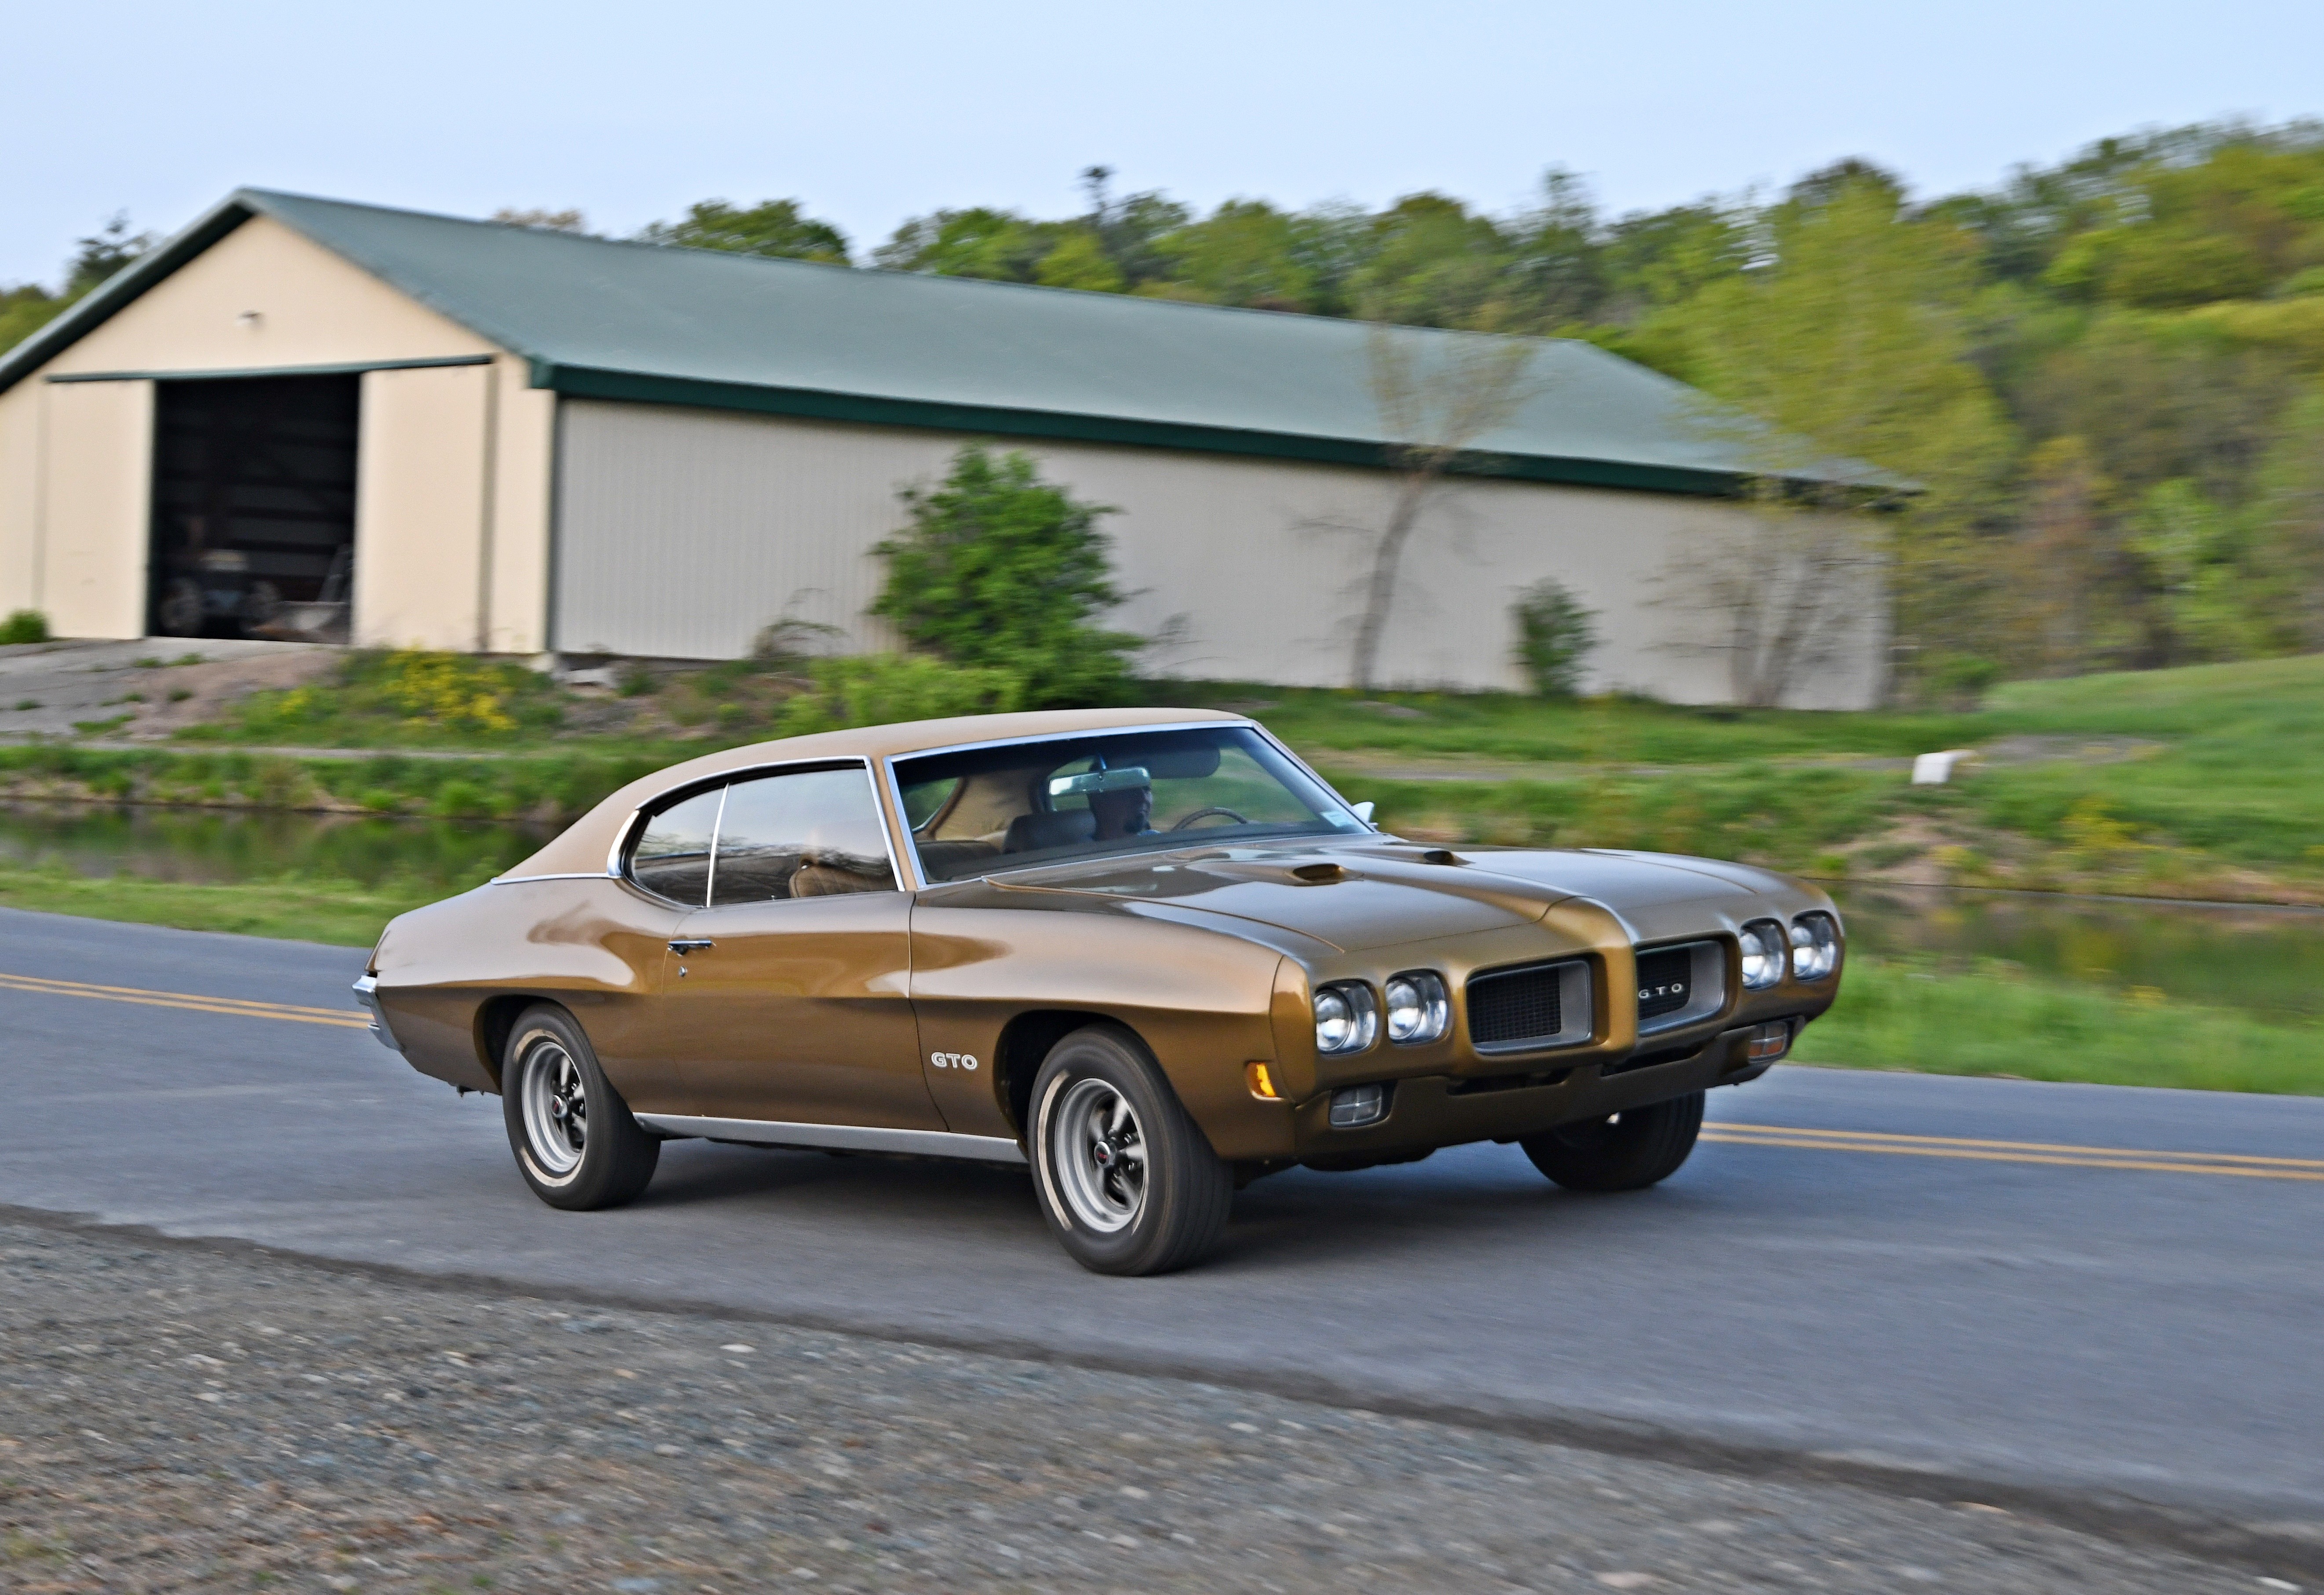 This Granada Gold 1970 GTO Made For The Ideal First Car